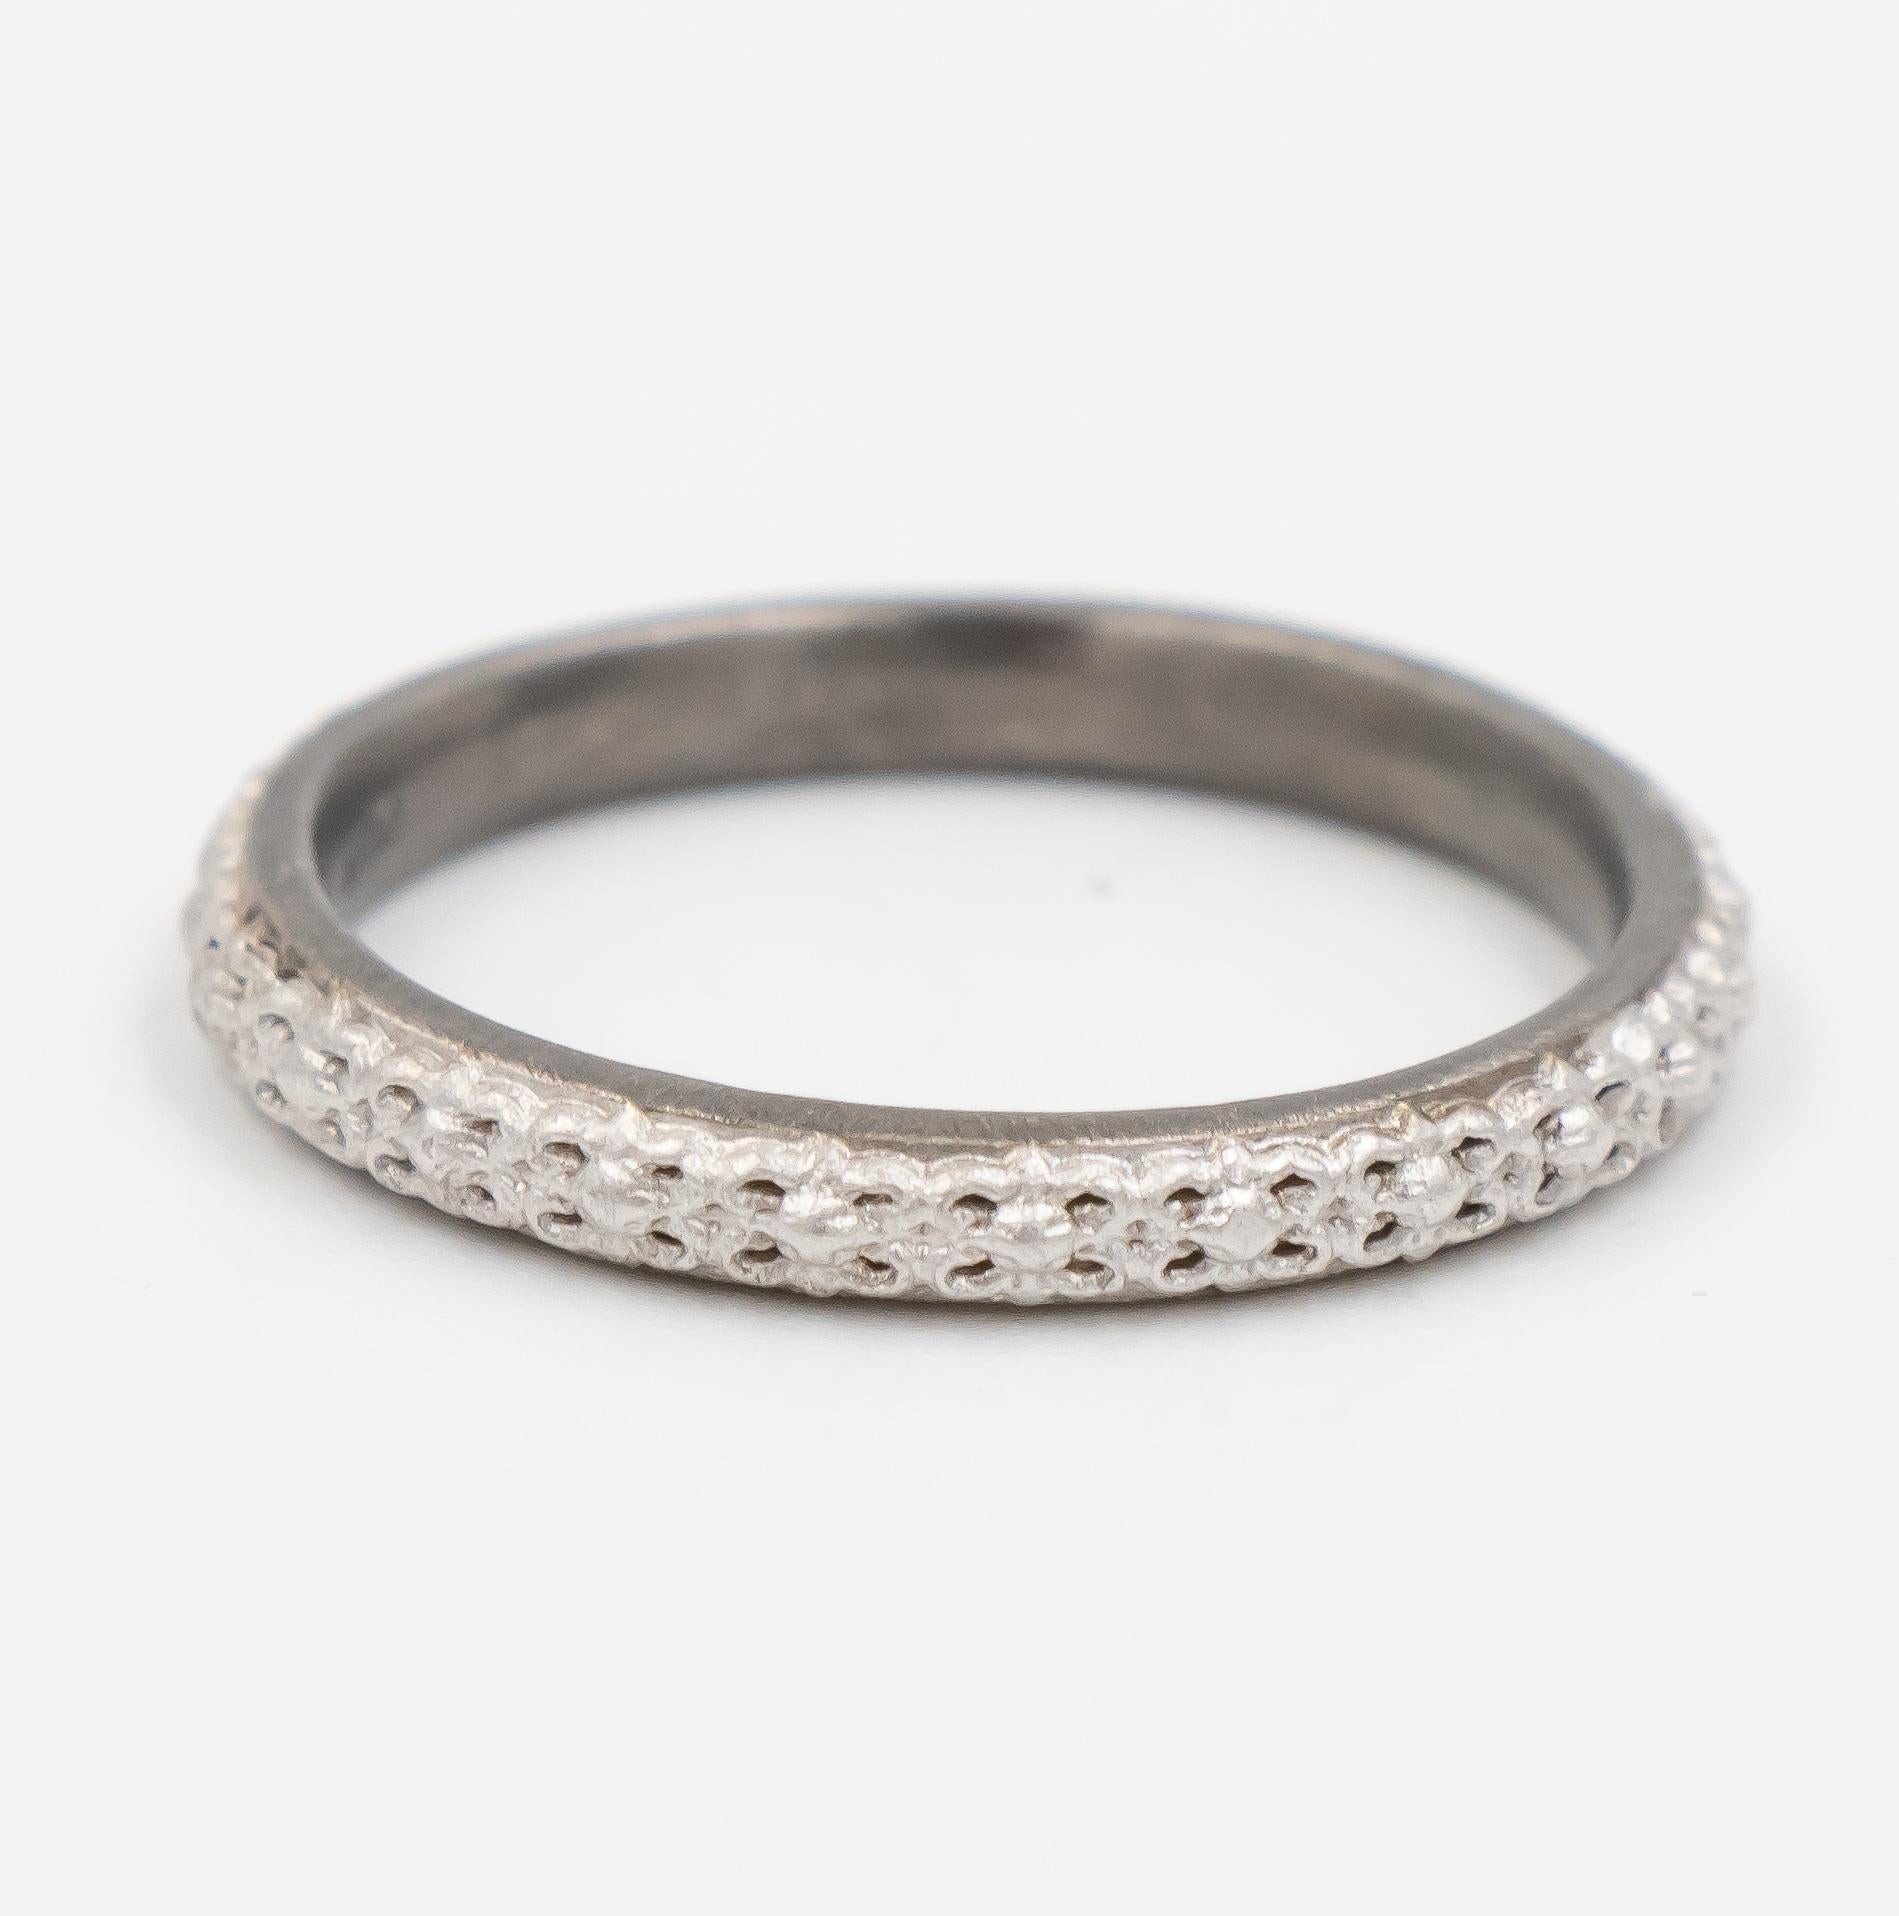 This Armenta ring is a part of the New World collection. It features oxidized sterling silver with a hand engraved design. 

Ring Size: 6.25
Width: 2.5mm

Armenta Style Number: 08734